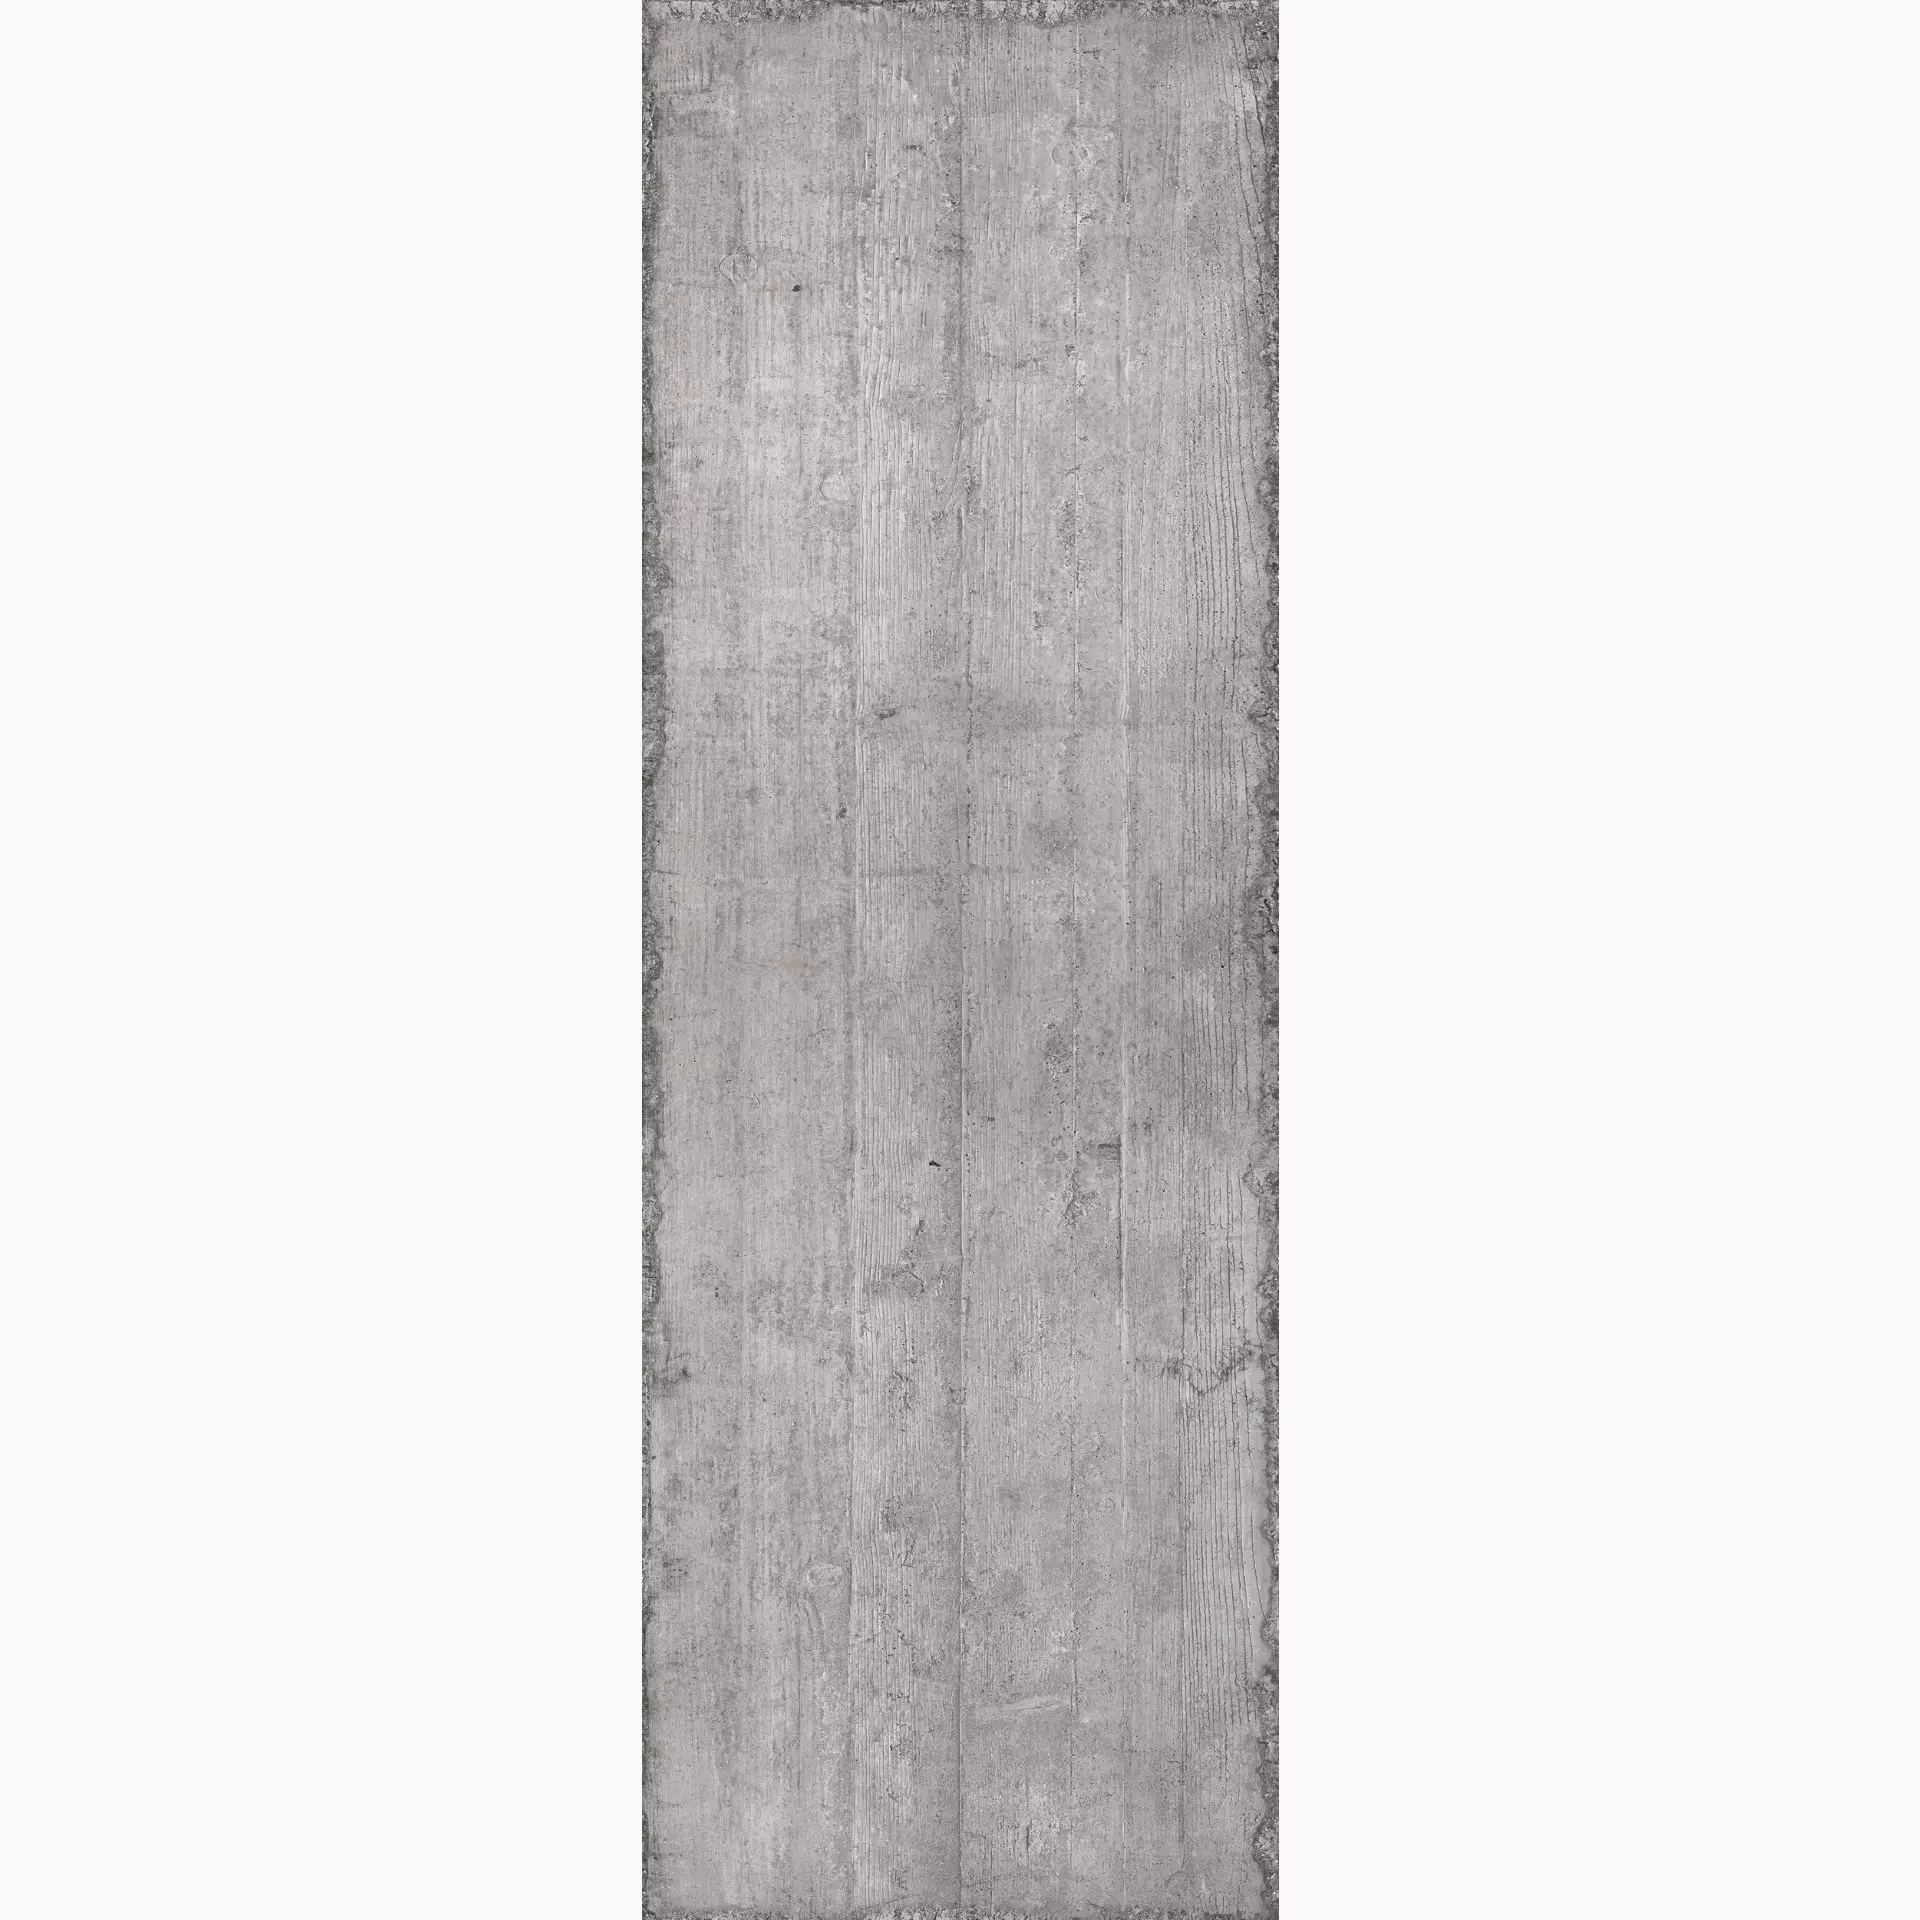 Sant Agostino Form Grey Natural CSAFORGR60 60x180cm rectified 10mm